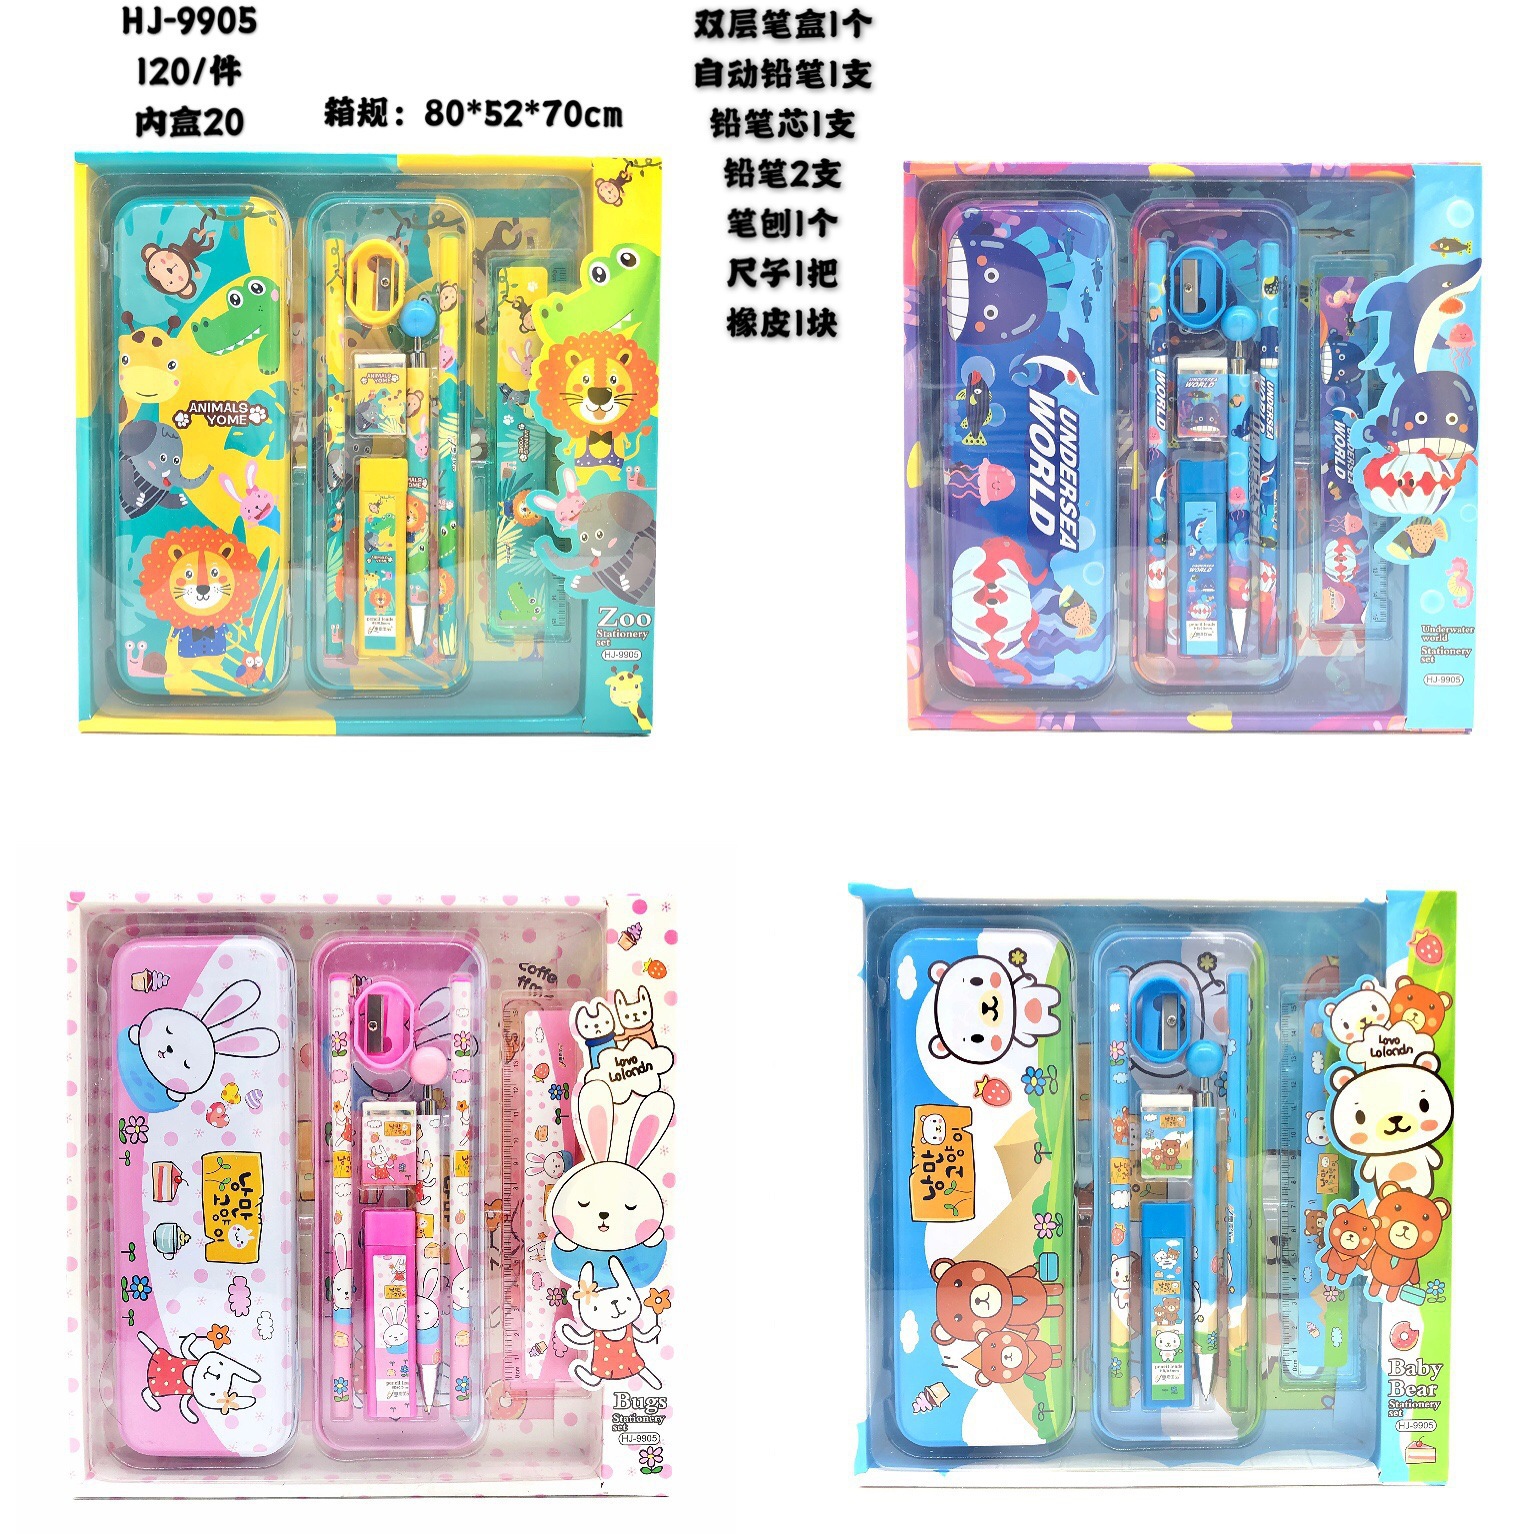 9905 stationery suit gift box primary school student school supplies big gift bag school tools wholesale children‘s birthday gifts